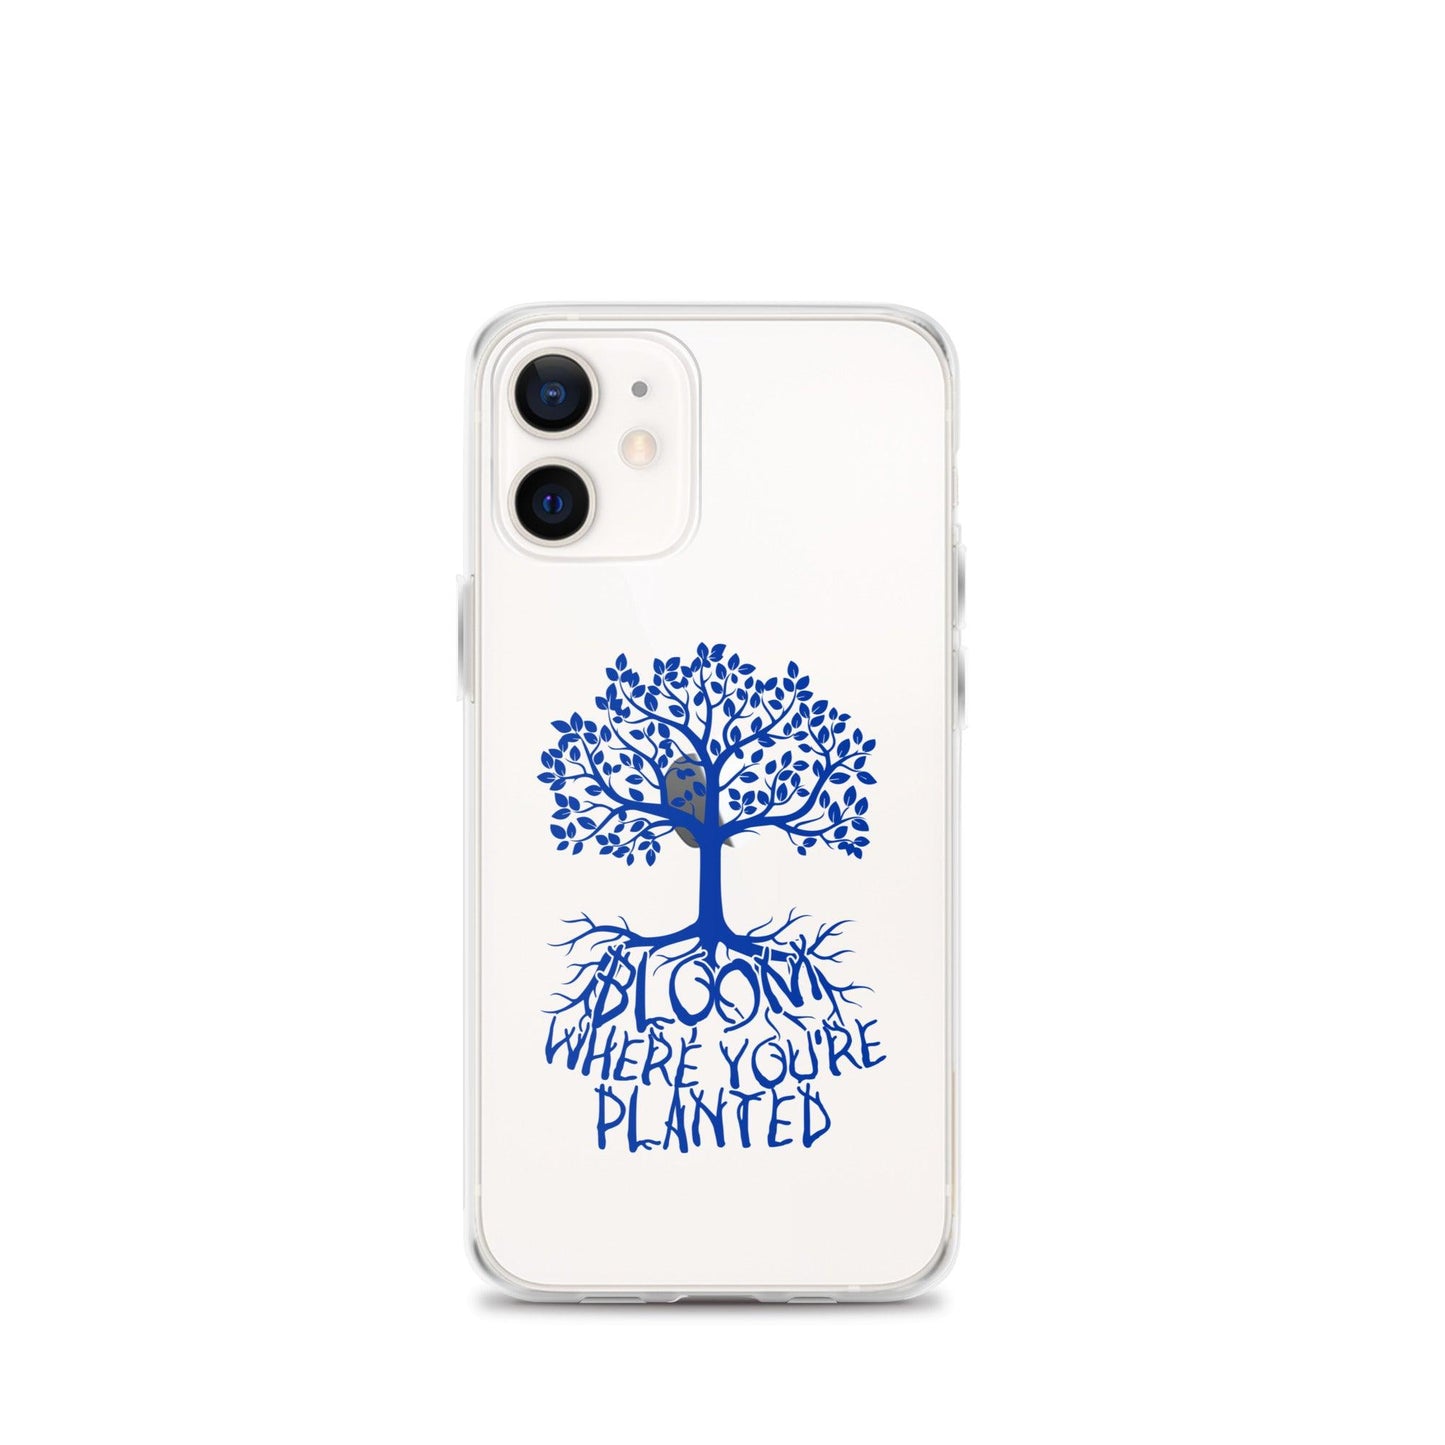 Nate Sestina "Where You're Planted" iPhone Case - Fan Arch